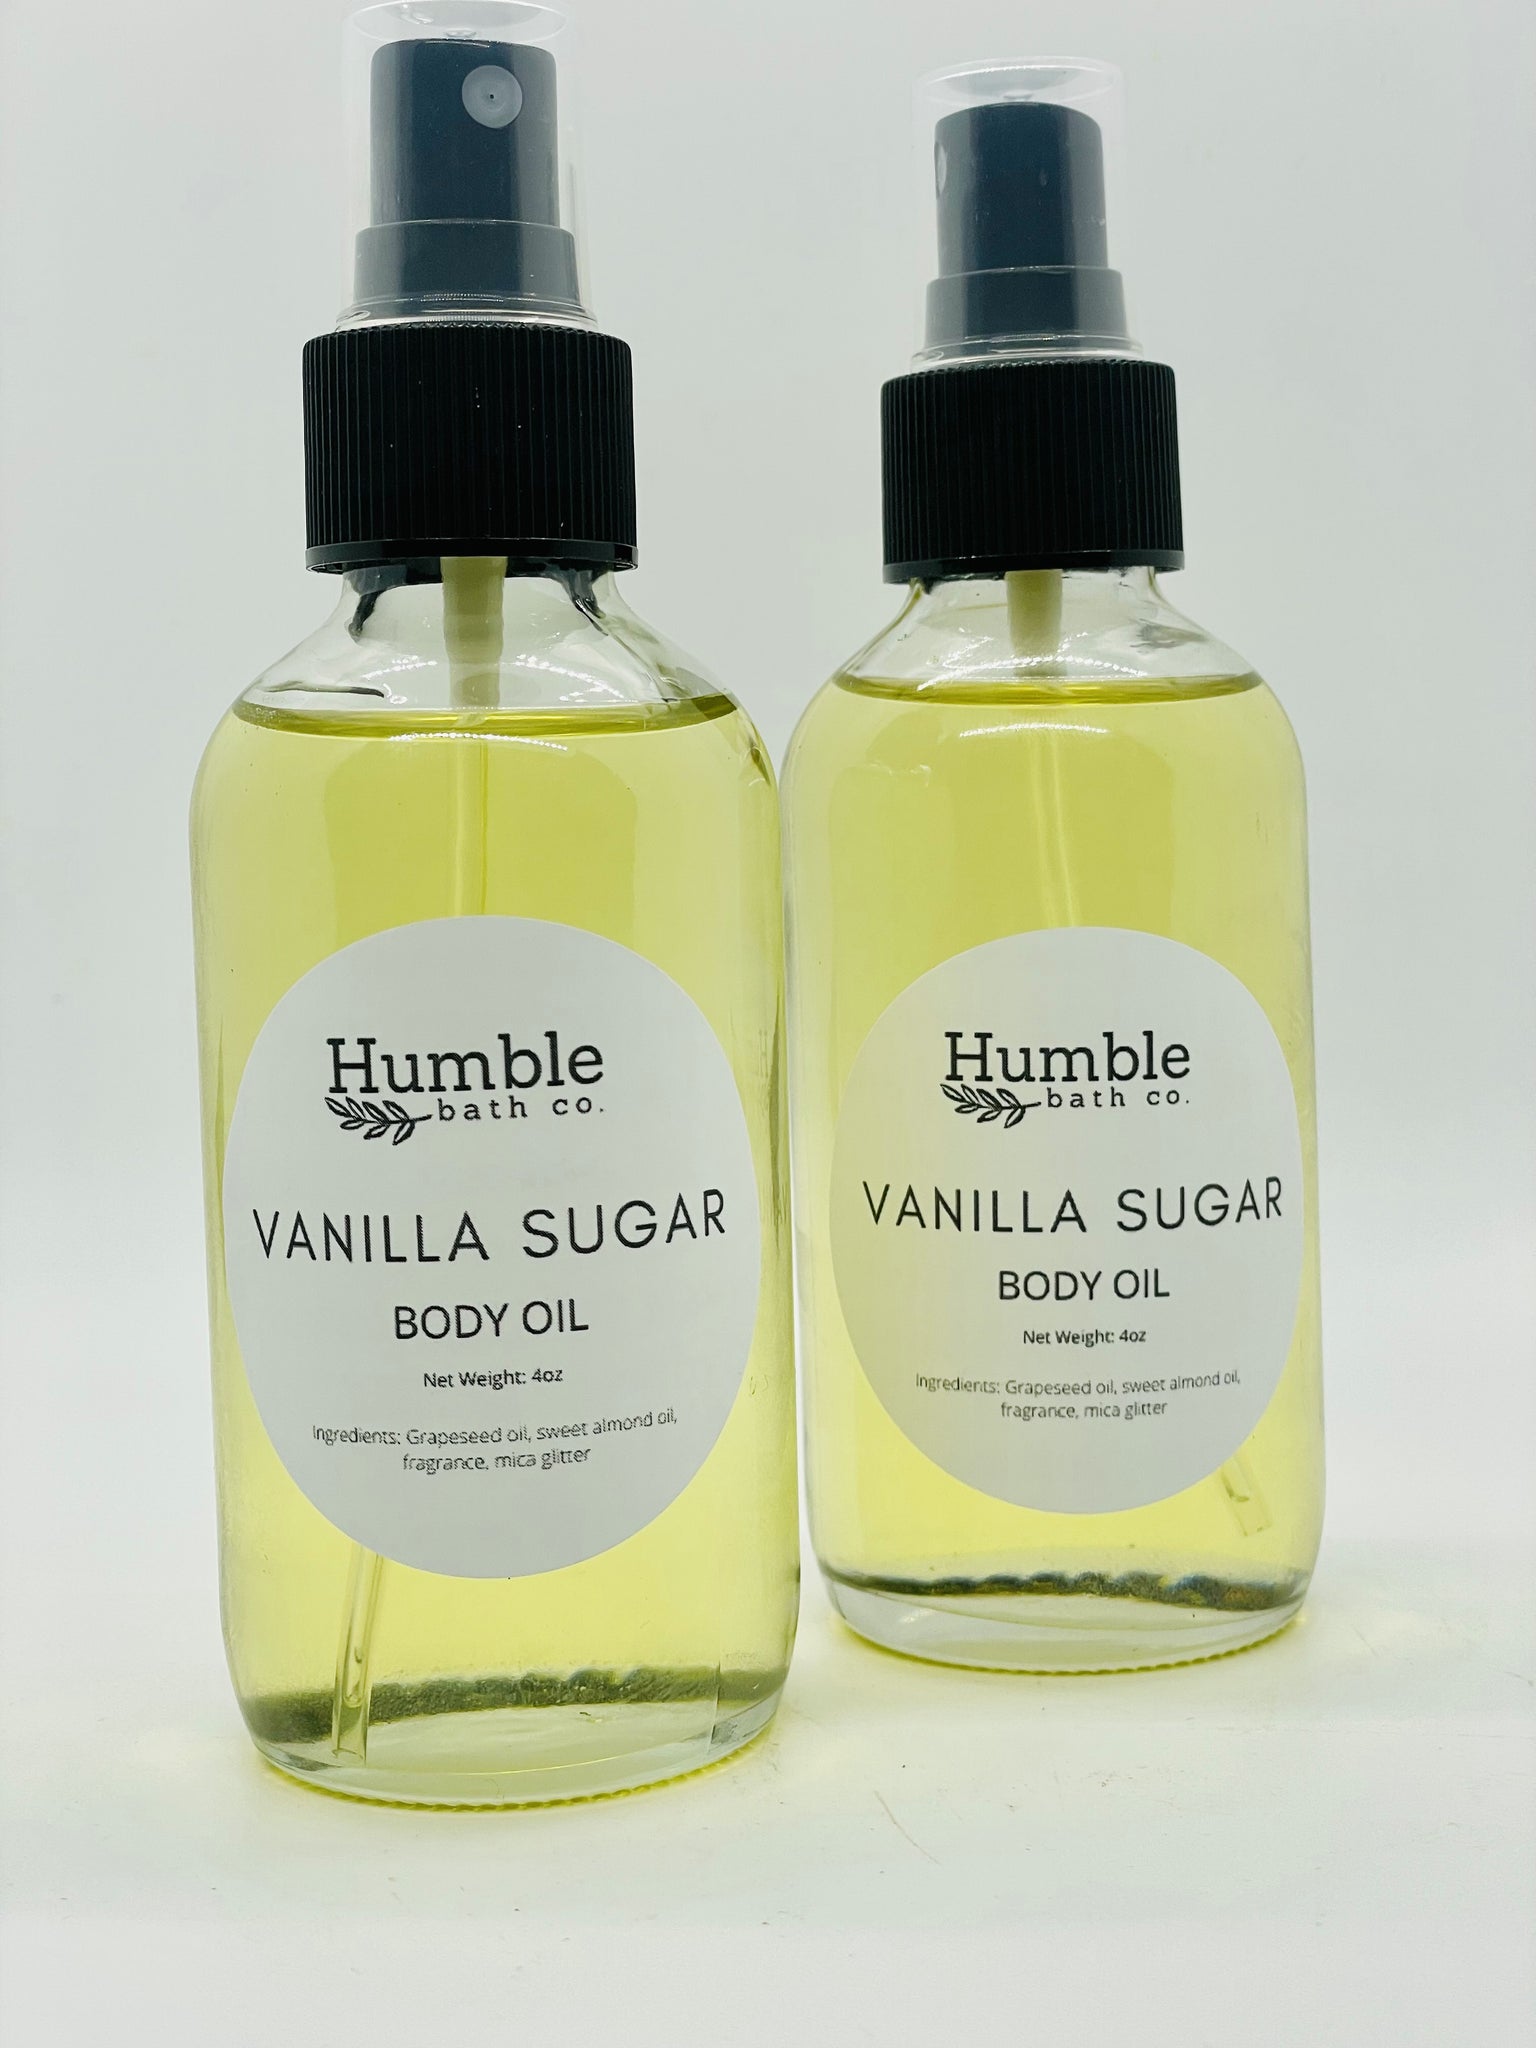 Warm Vanilla Sugar Type Oil - Yummy & sweet, Gourmand Fragrance - Warm and  syrupy, Uncut, Alcohol Free Concentrated Perfumed Oil